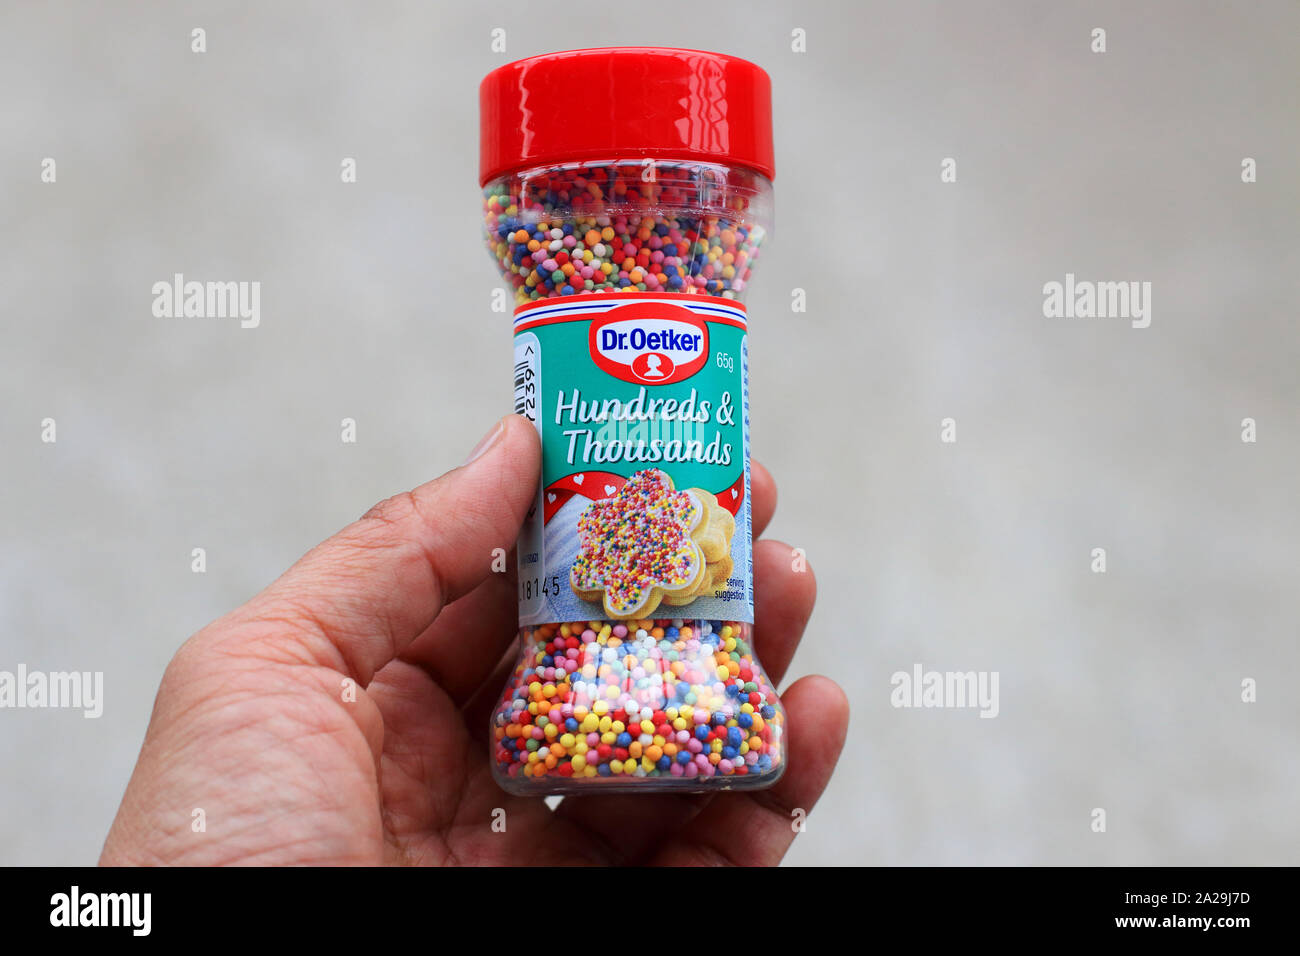 Hand holding Dr. Oetker Hundreds and Thousands edible colourful sprinkles Stock Photo